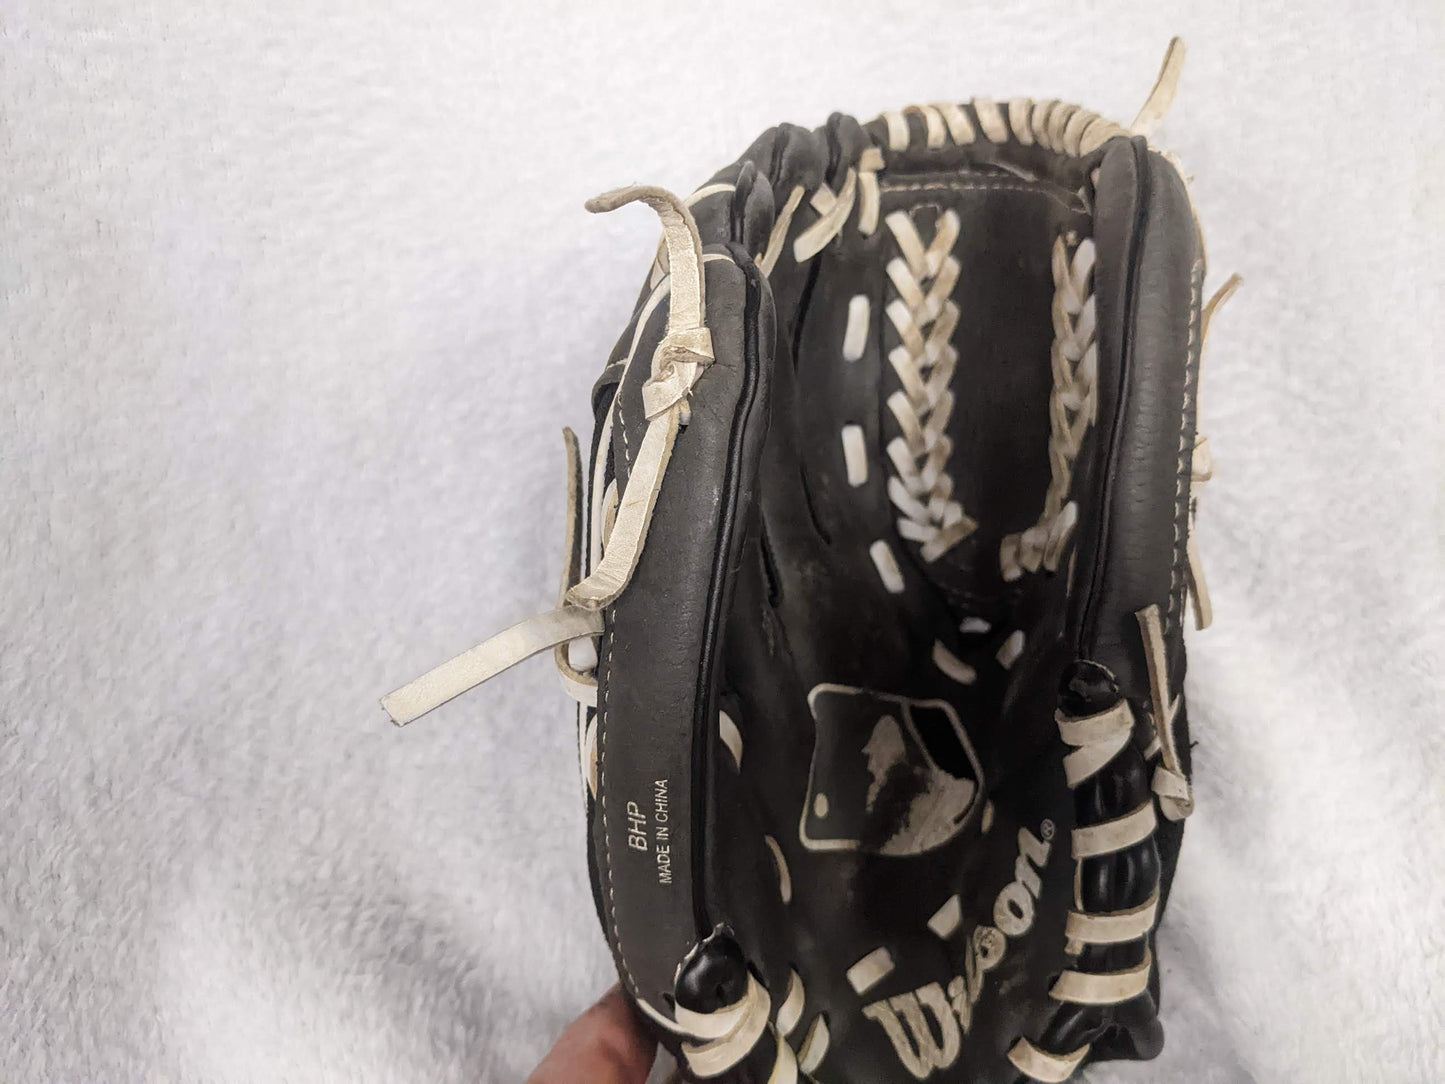 Wilson Baseball Right Hand (LHT) Mitt Size 10.5 In Color Black Condition Used